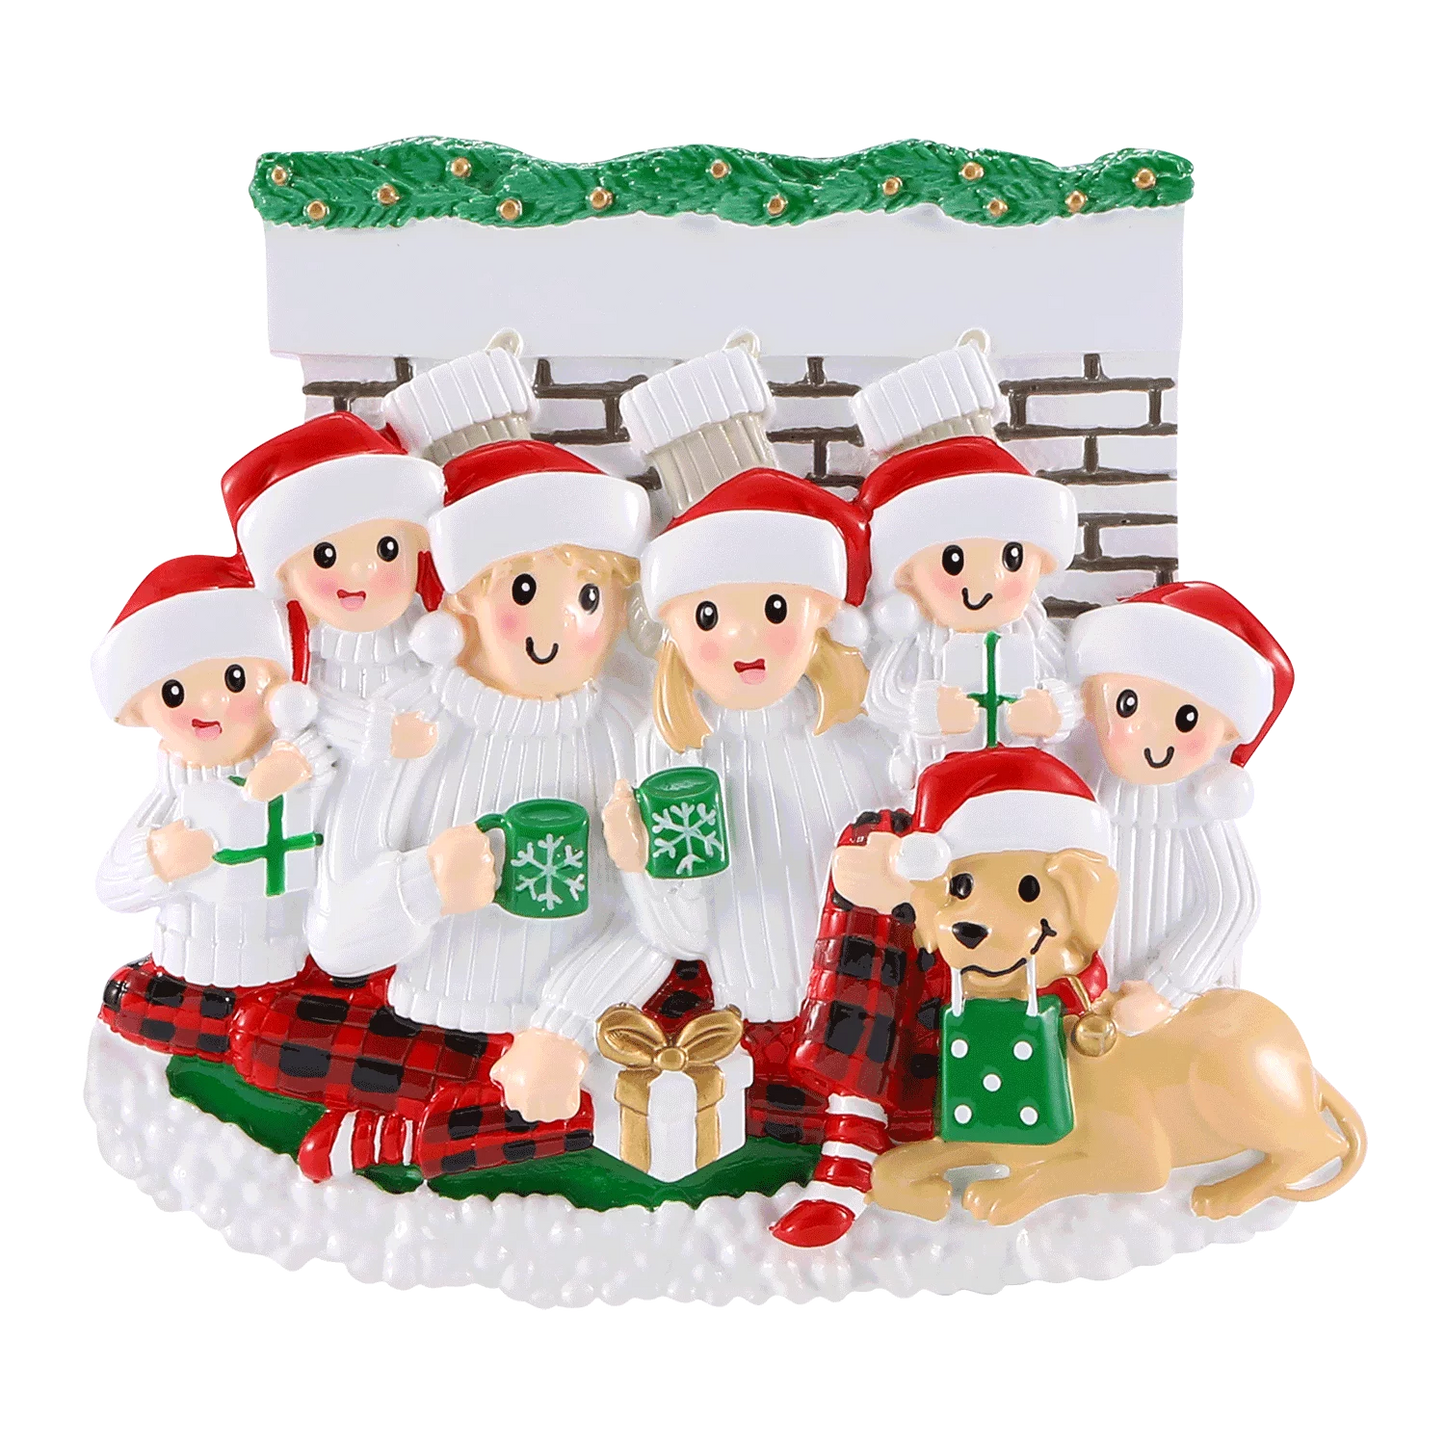 Fireplace Family of 6 Ornament